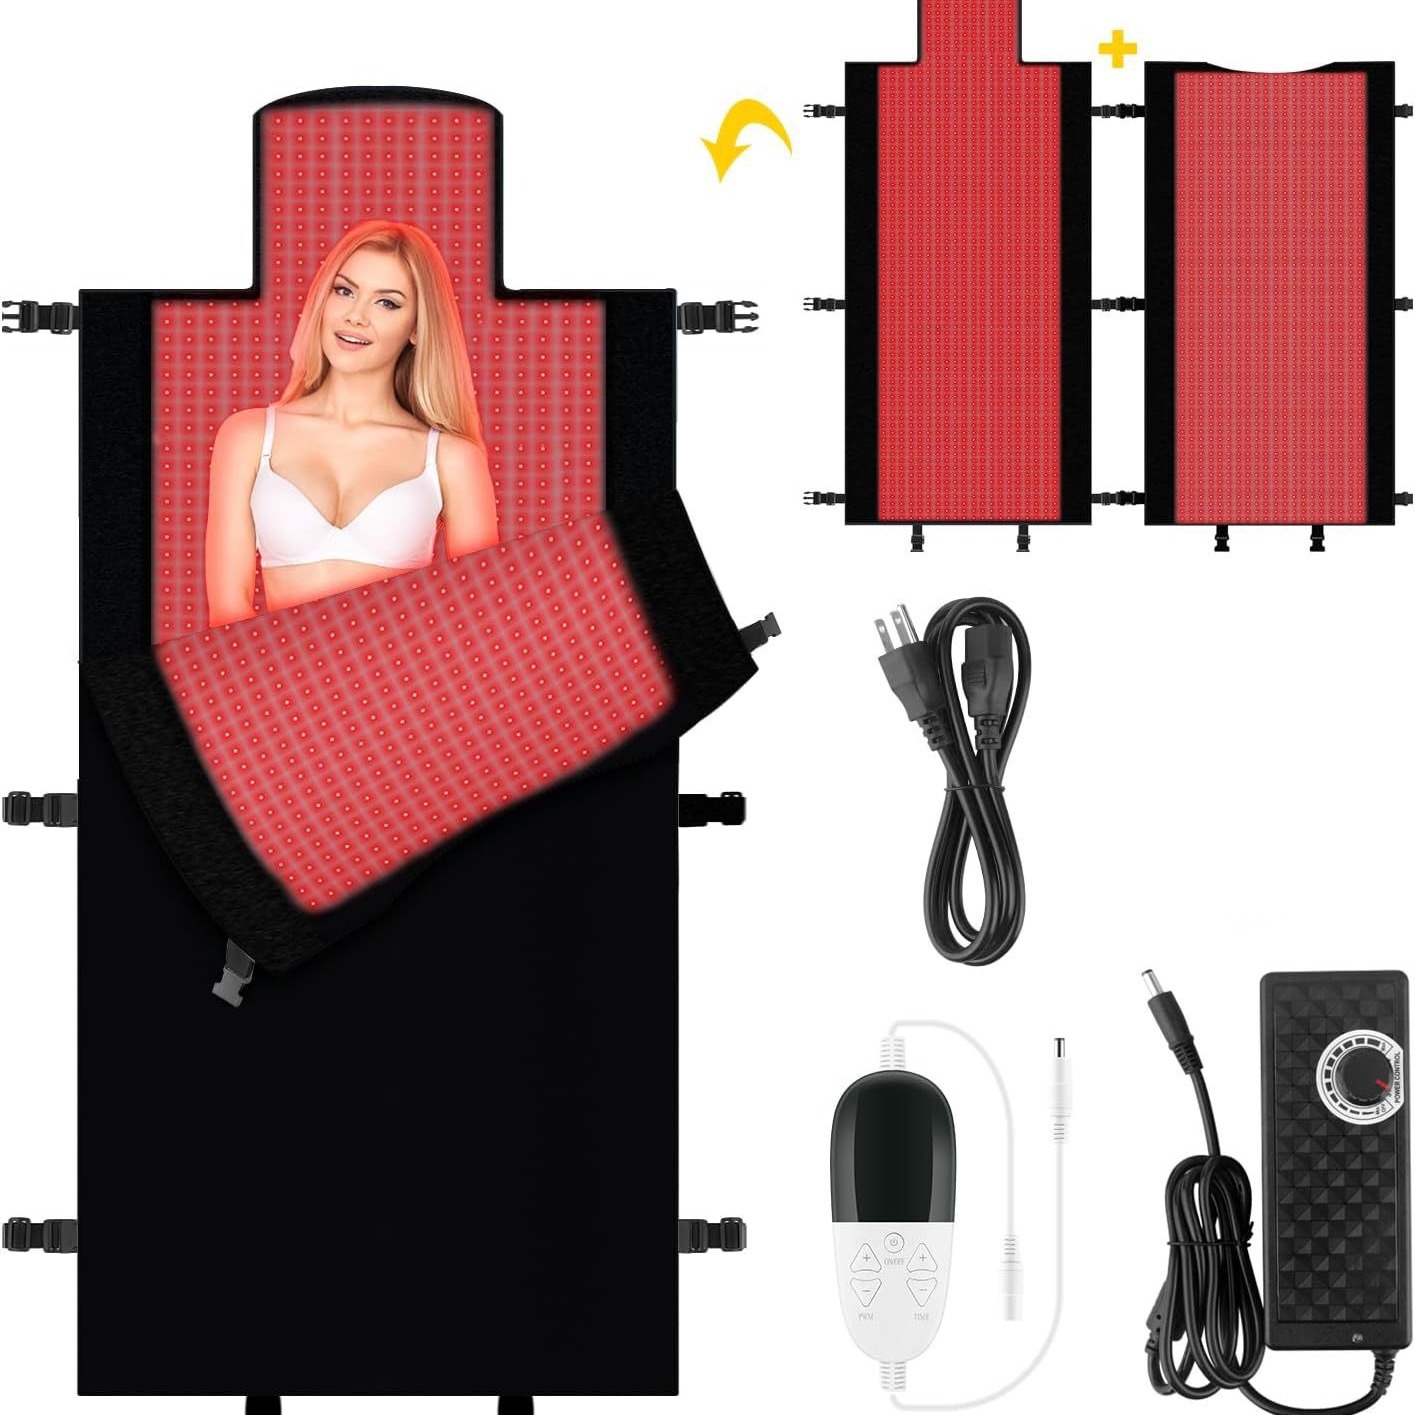 Cross-Border Wired Red Light Beauty Sleeping Bag Home Red Light Blanket Infrared Heating Relieve Fatigue Soreness Sleeping Bag